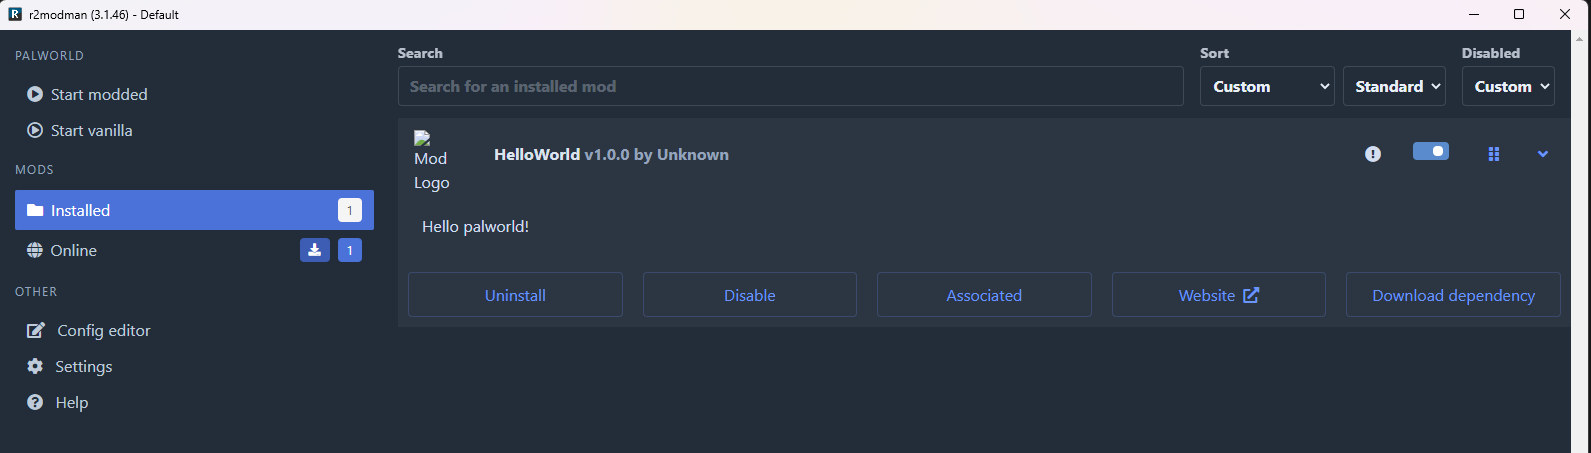 Mod manager with installed mod